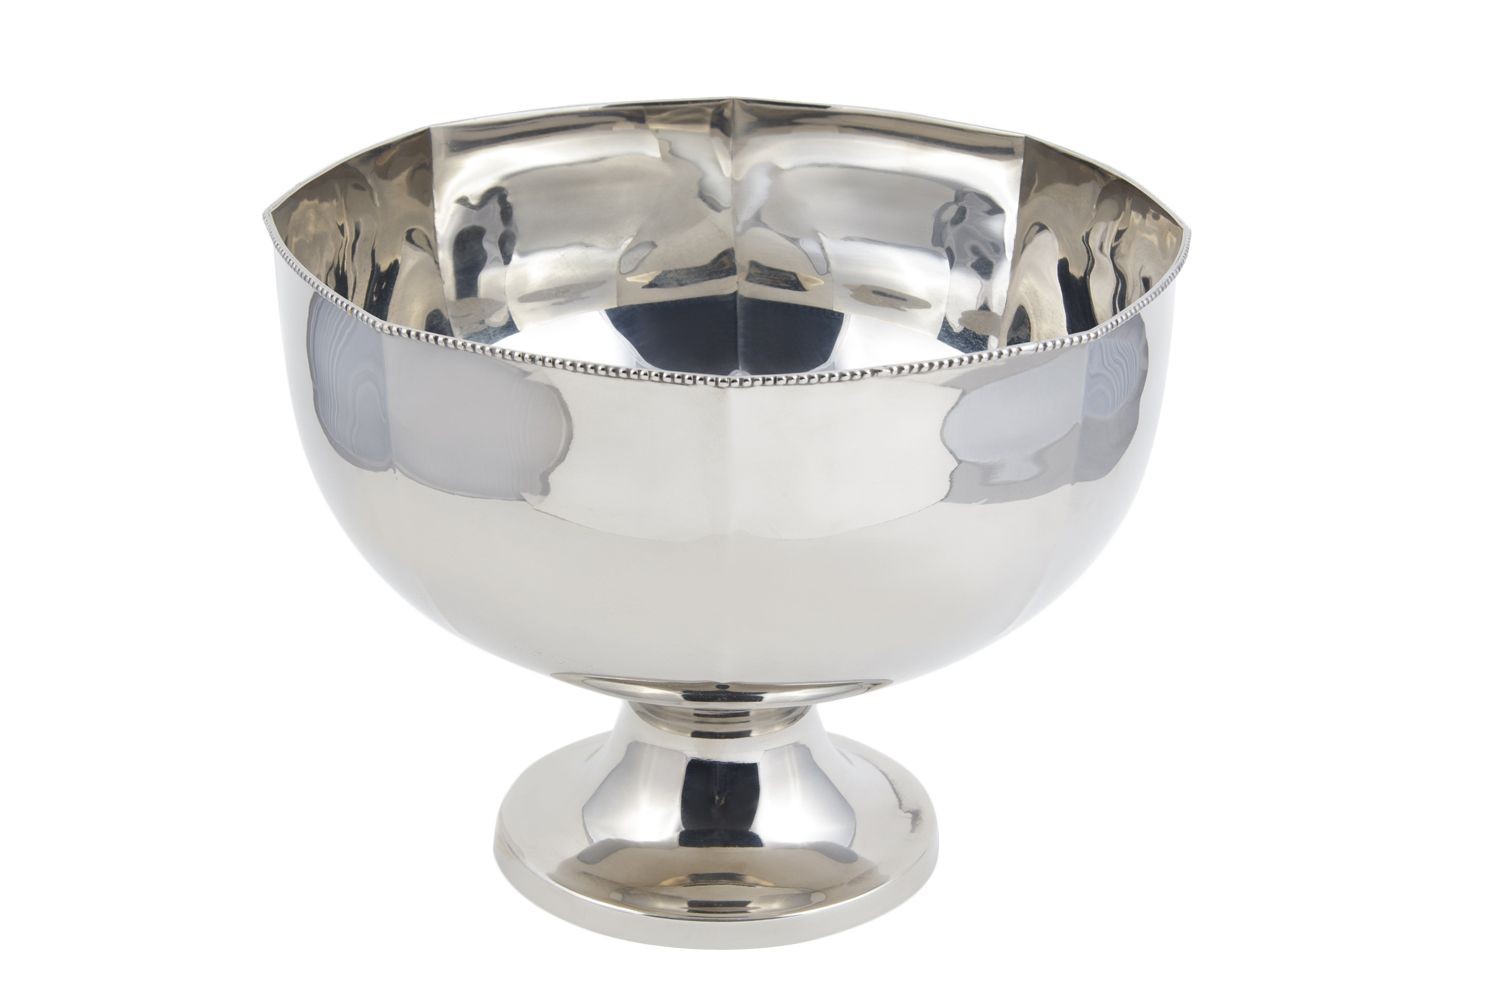 Bon Chef 61322 Stainless Steel Hollowware Punch Bowl with Pedestal Base, 3 Gallon